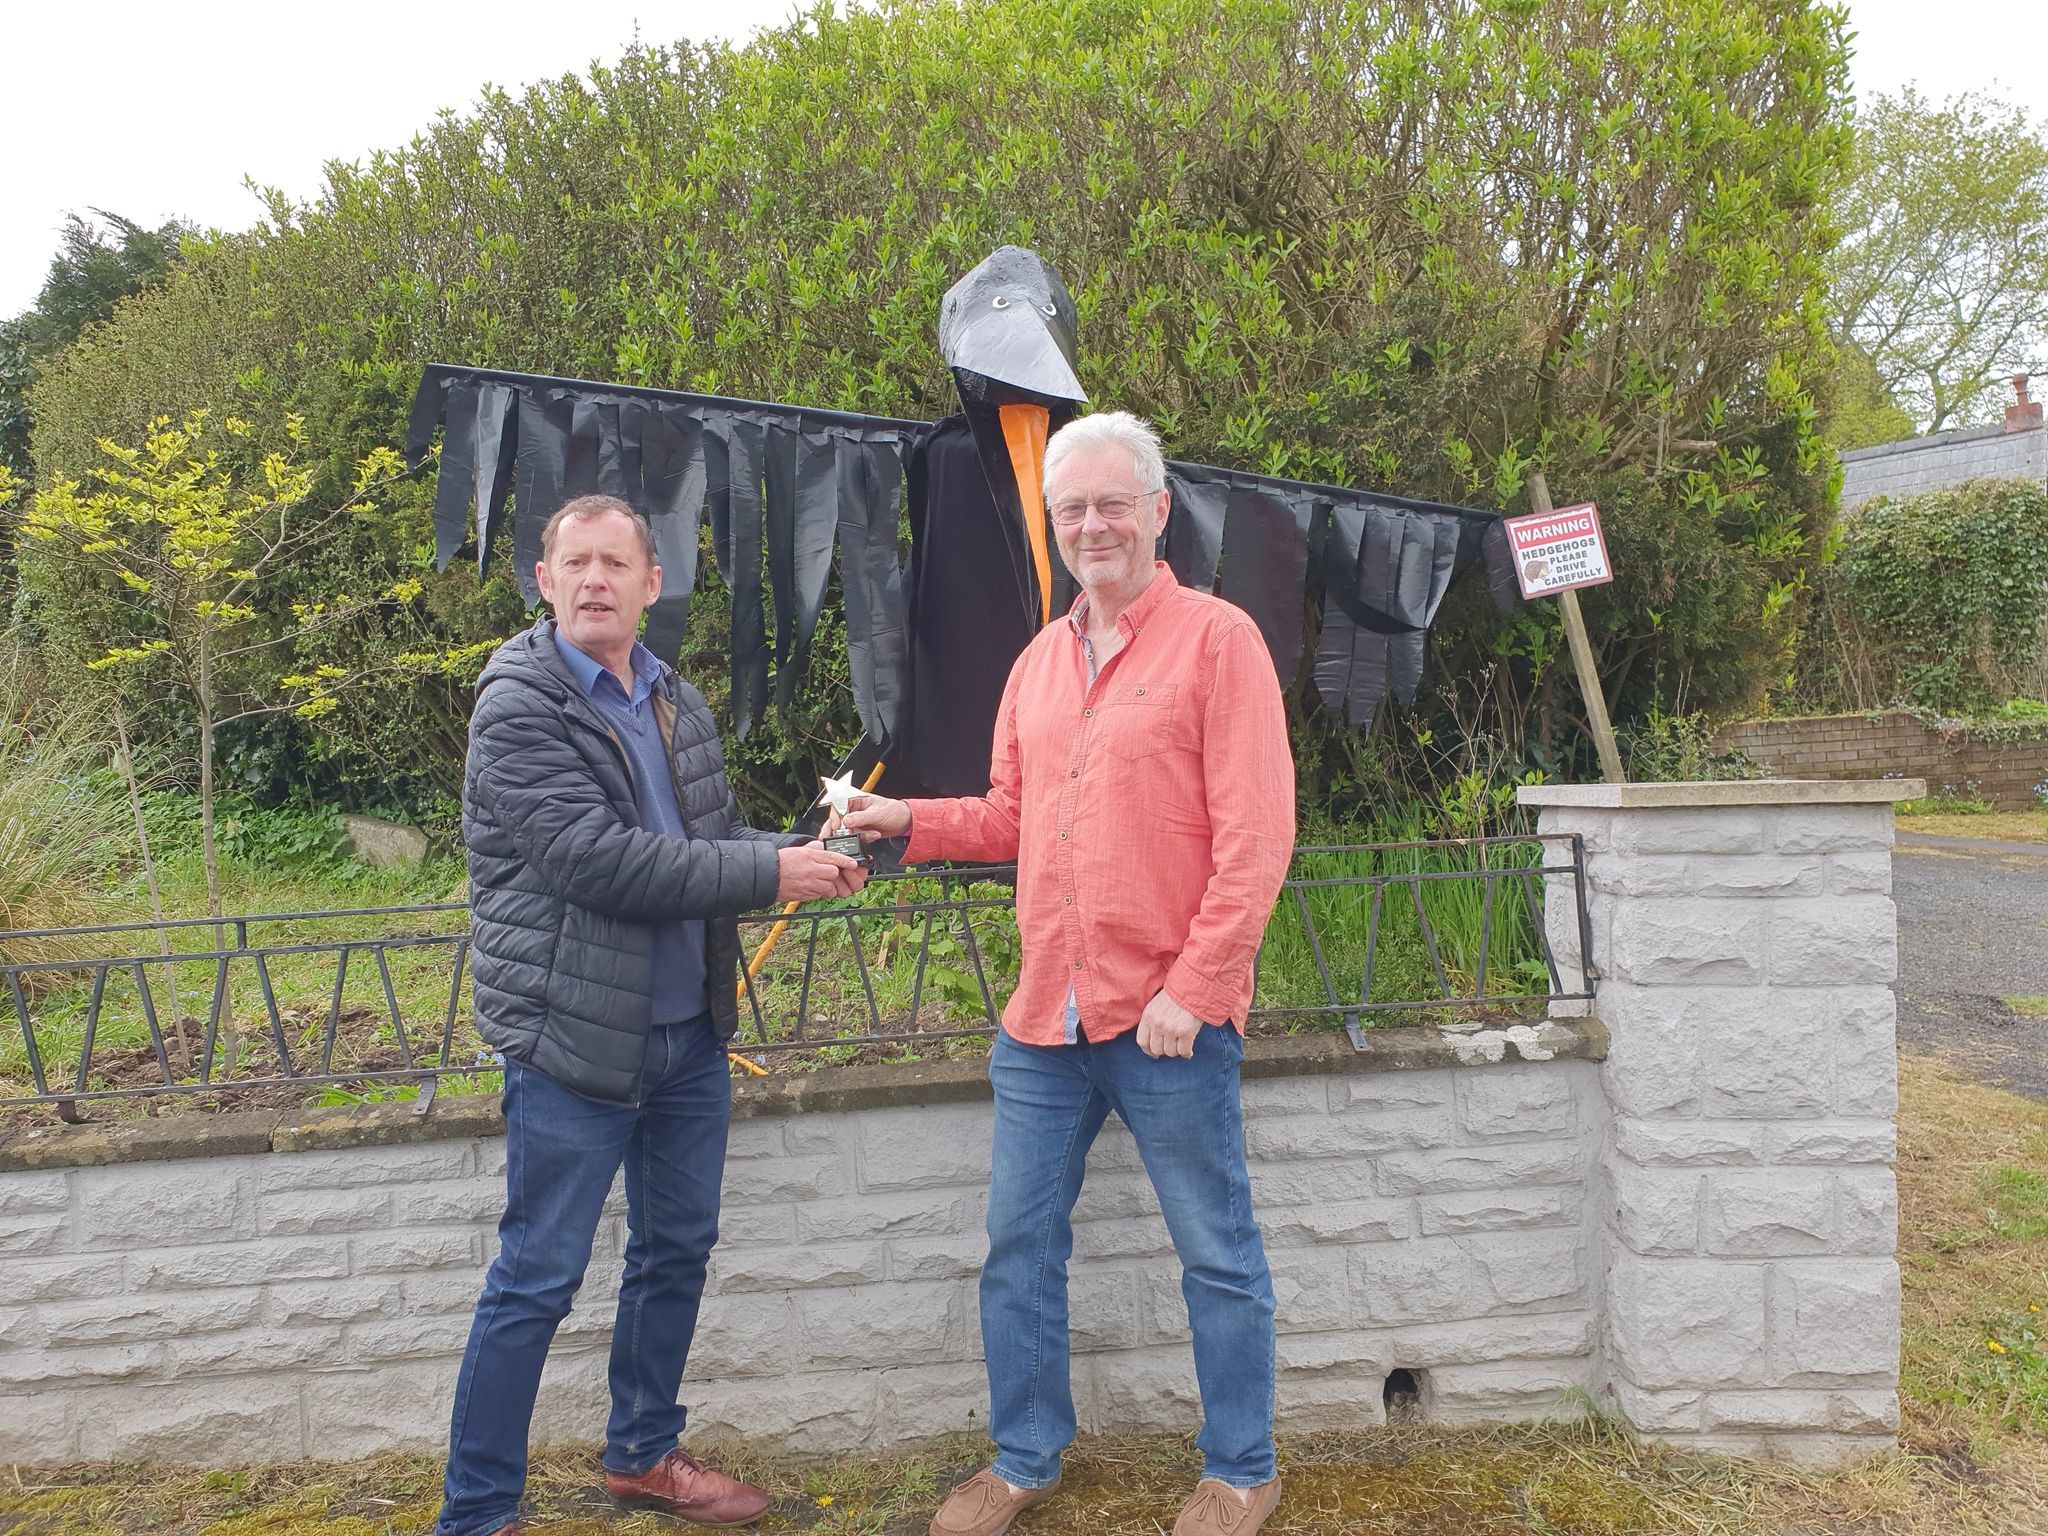 Coun Roger Phillips with Neil Martin and his third place entry The ScareCROW